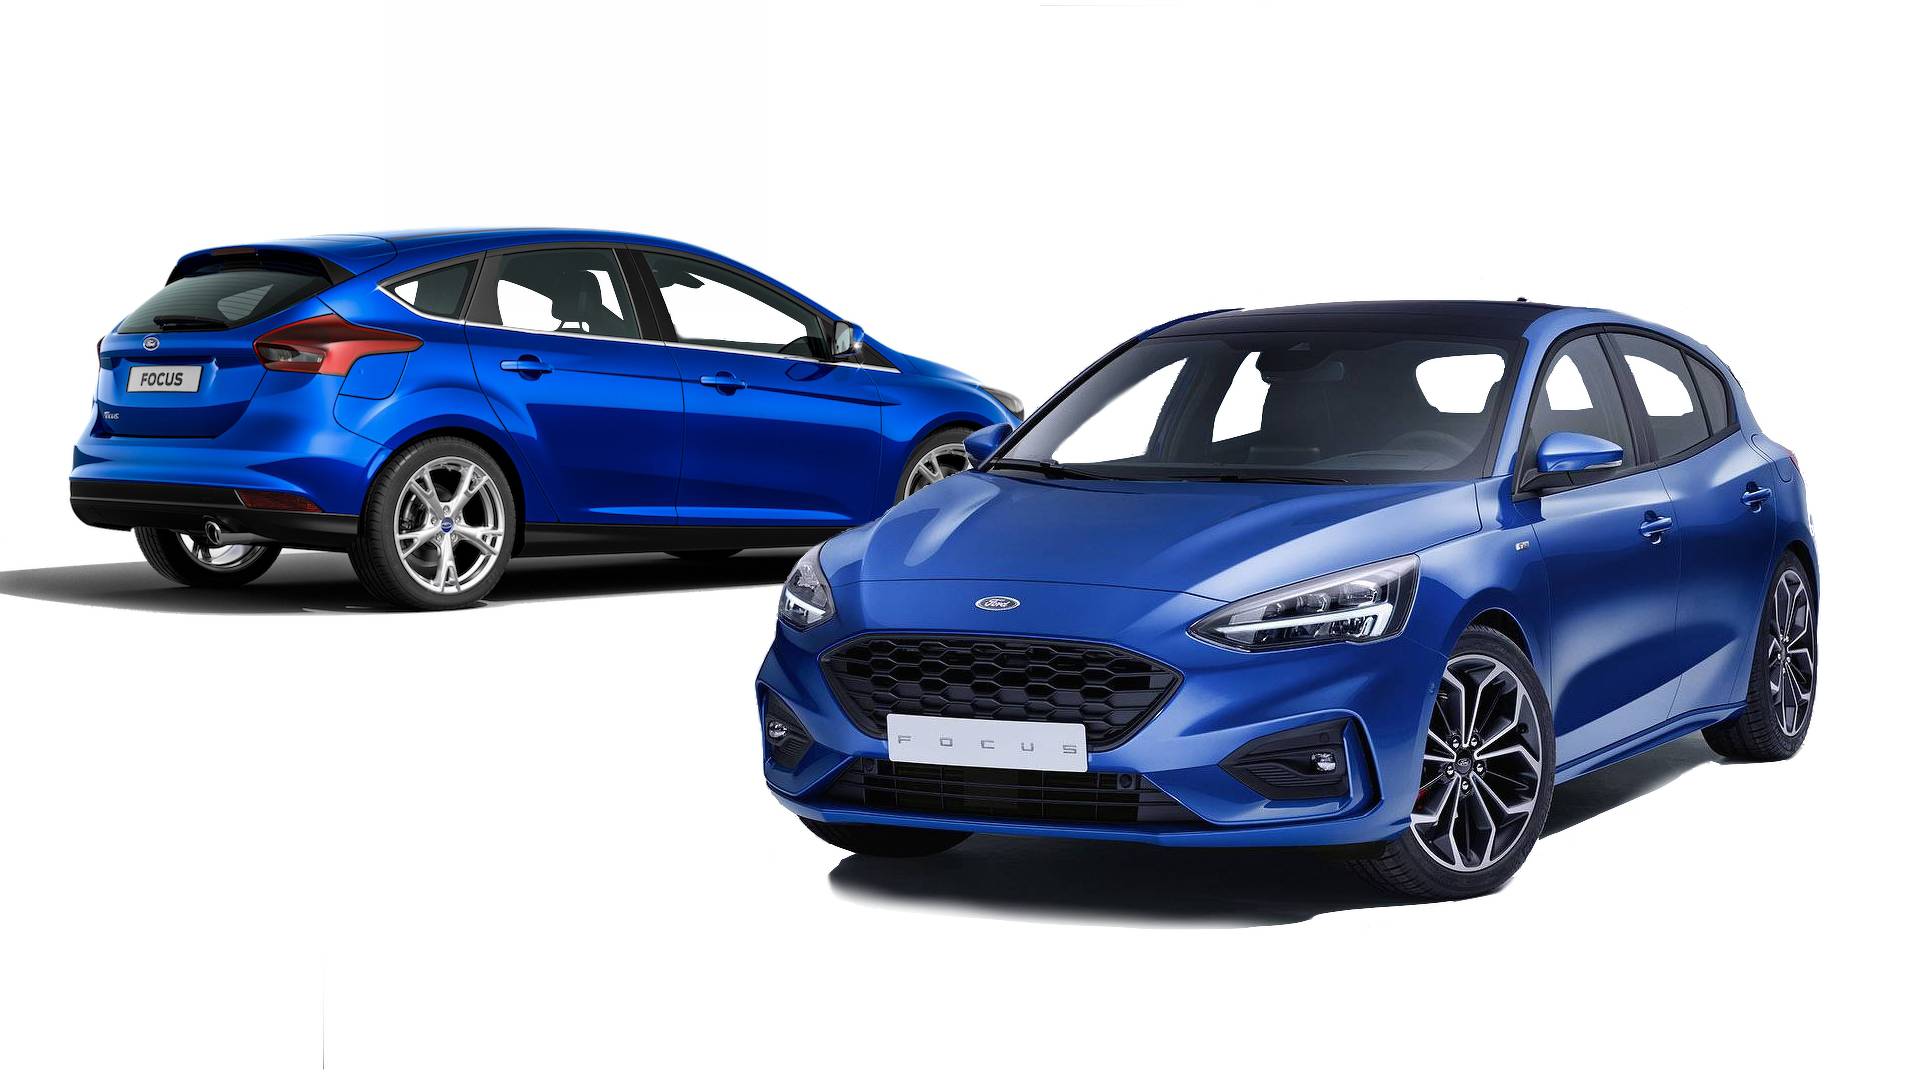 2019 Ford Focus: See The Changes Side-By-Side